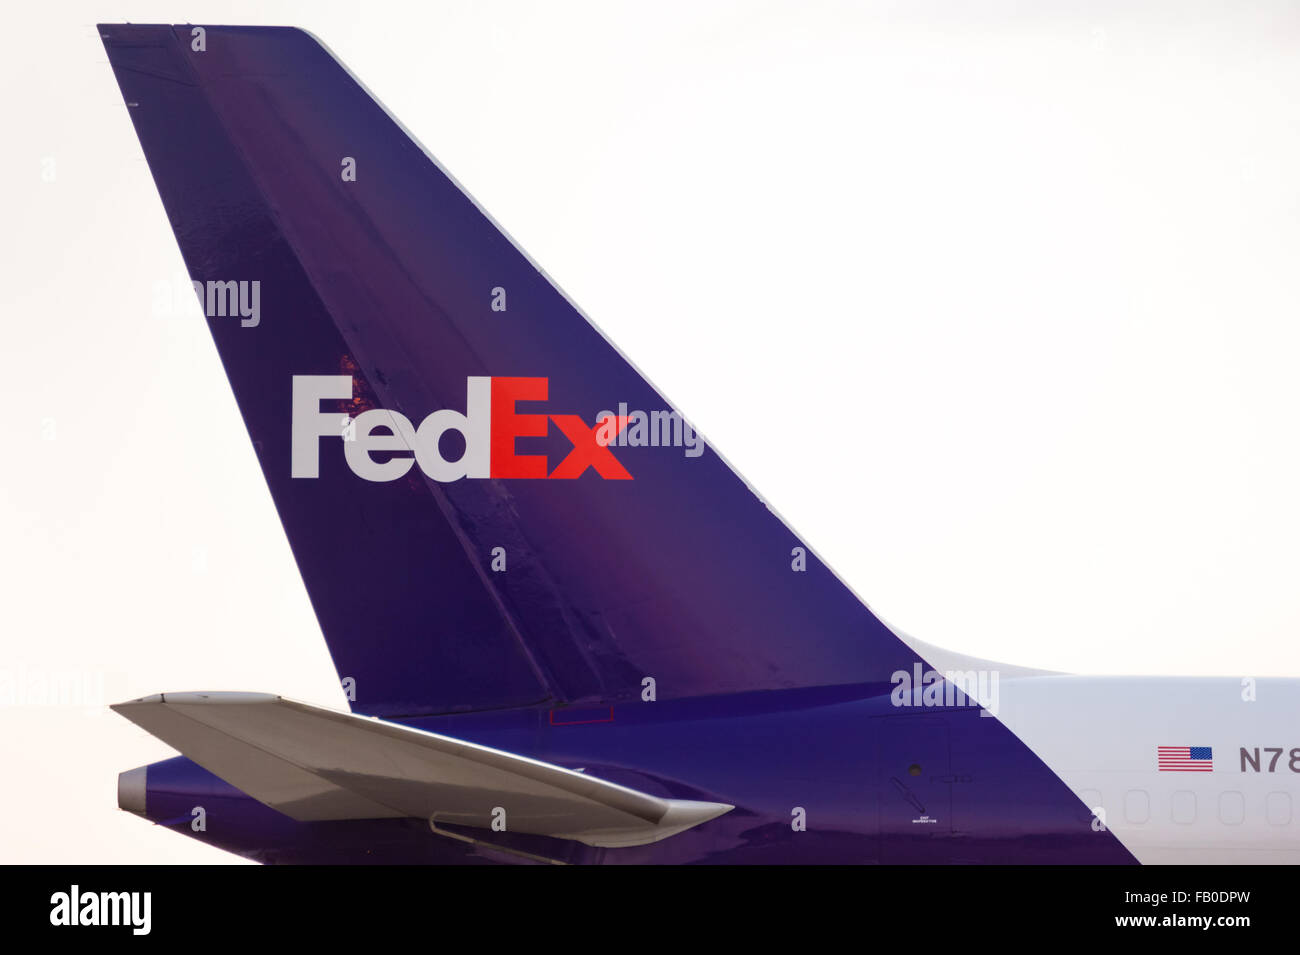 FedEx plane with company branding in Memphis, Tennessee, FedEx's headquarters. USA. Stock Photo